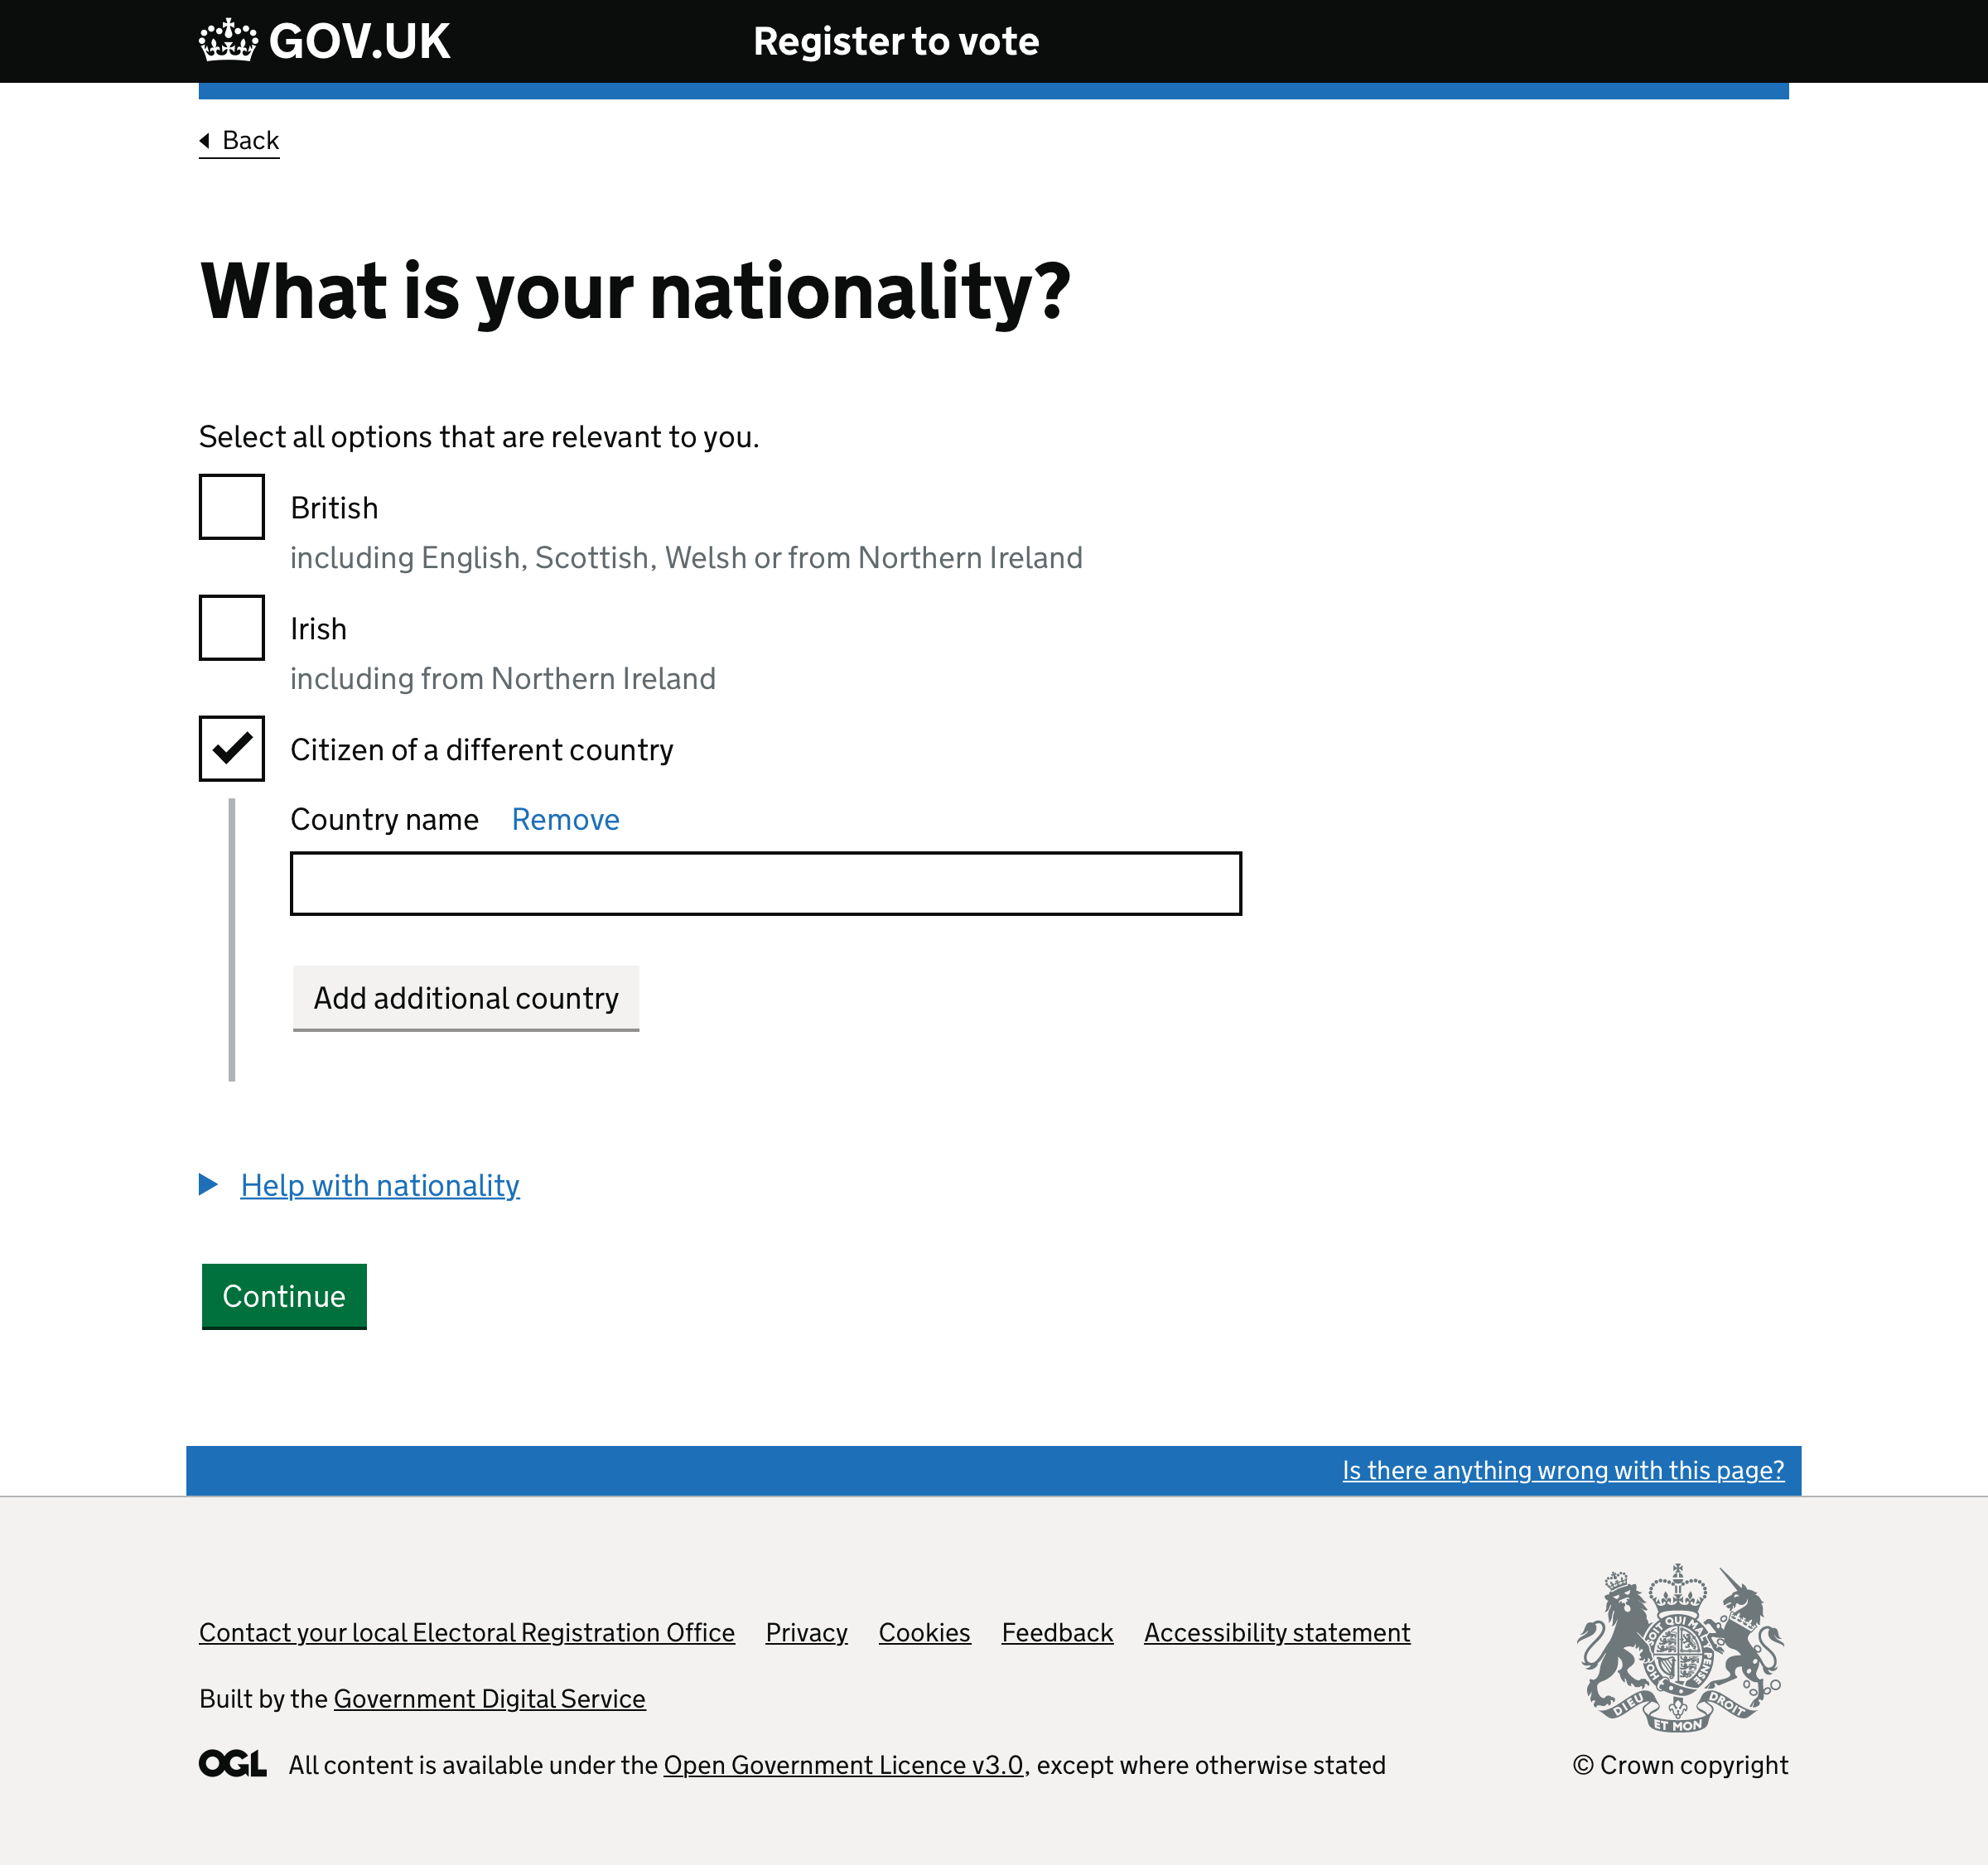 Screenshot of ‘What is your nationality’ question on the Register to vote service.